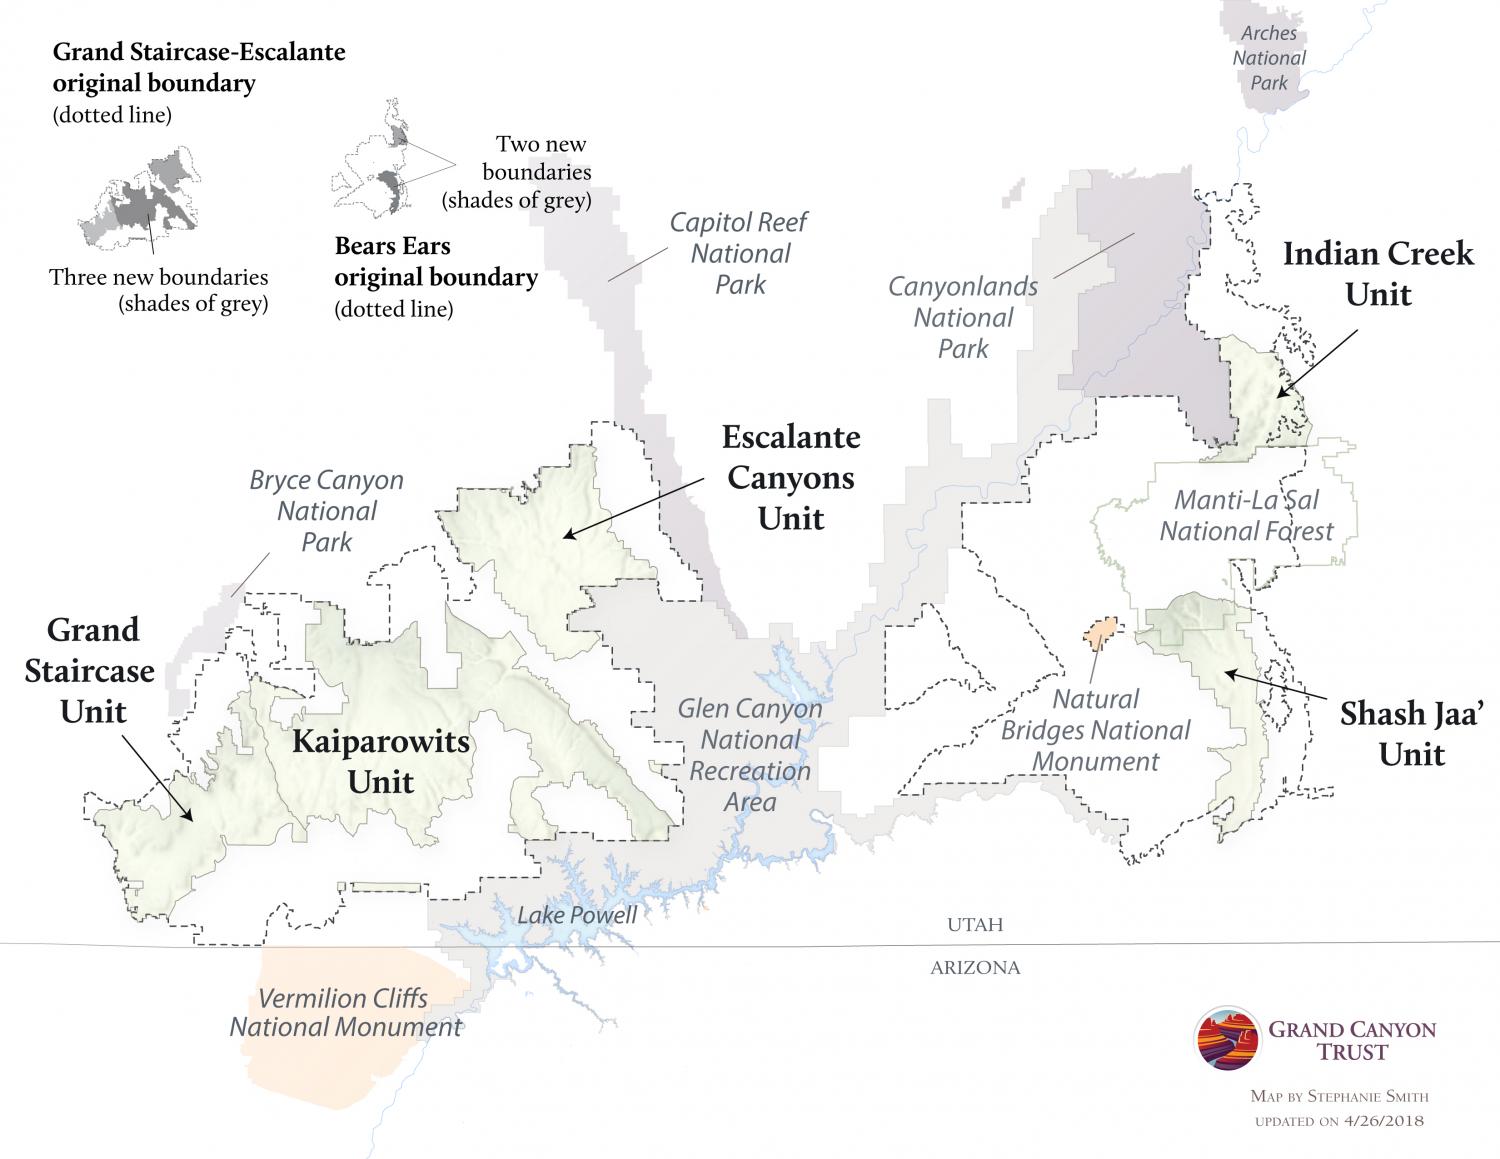 Changes to Grand Staircase-Escalante and Bears Ears National Monument map